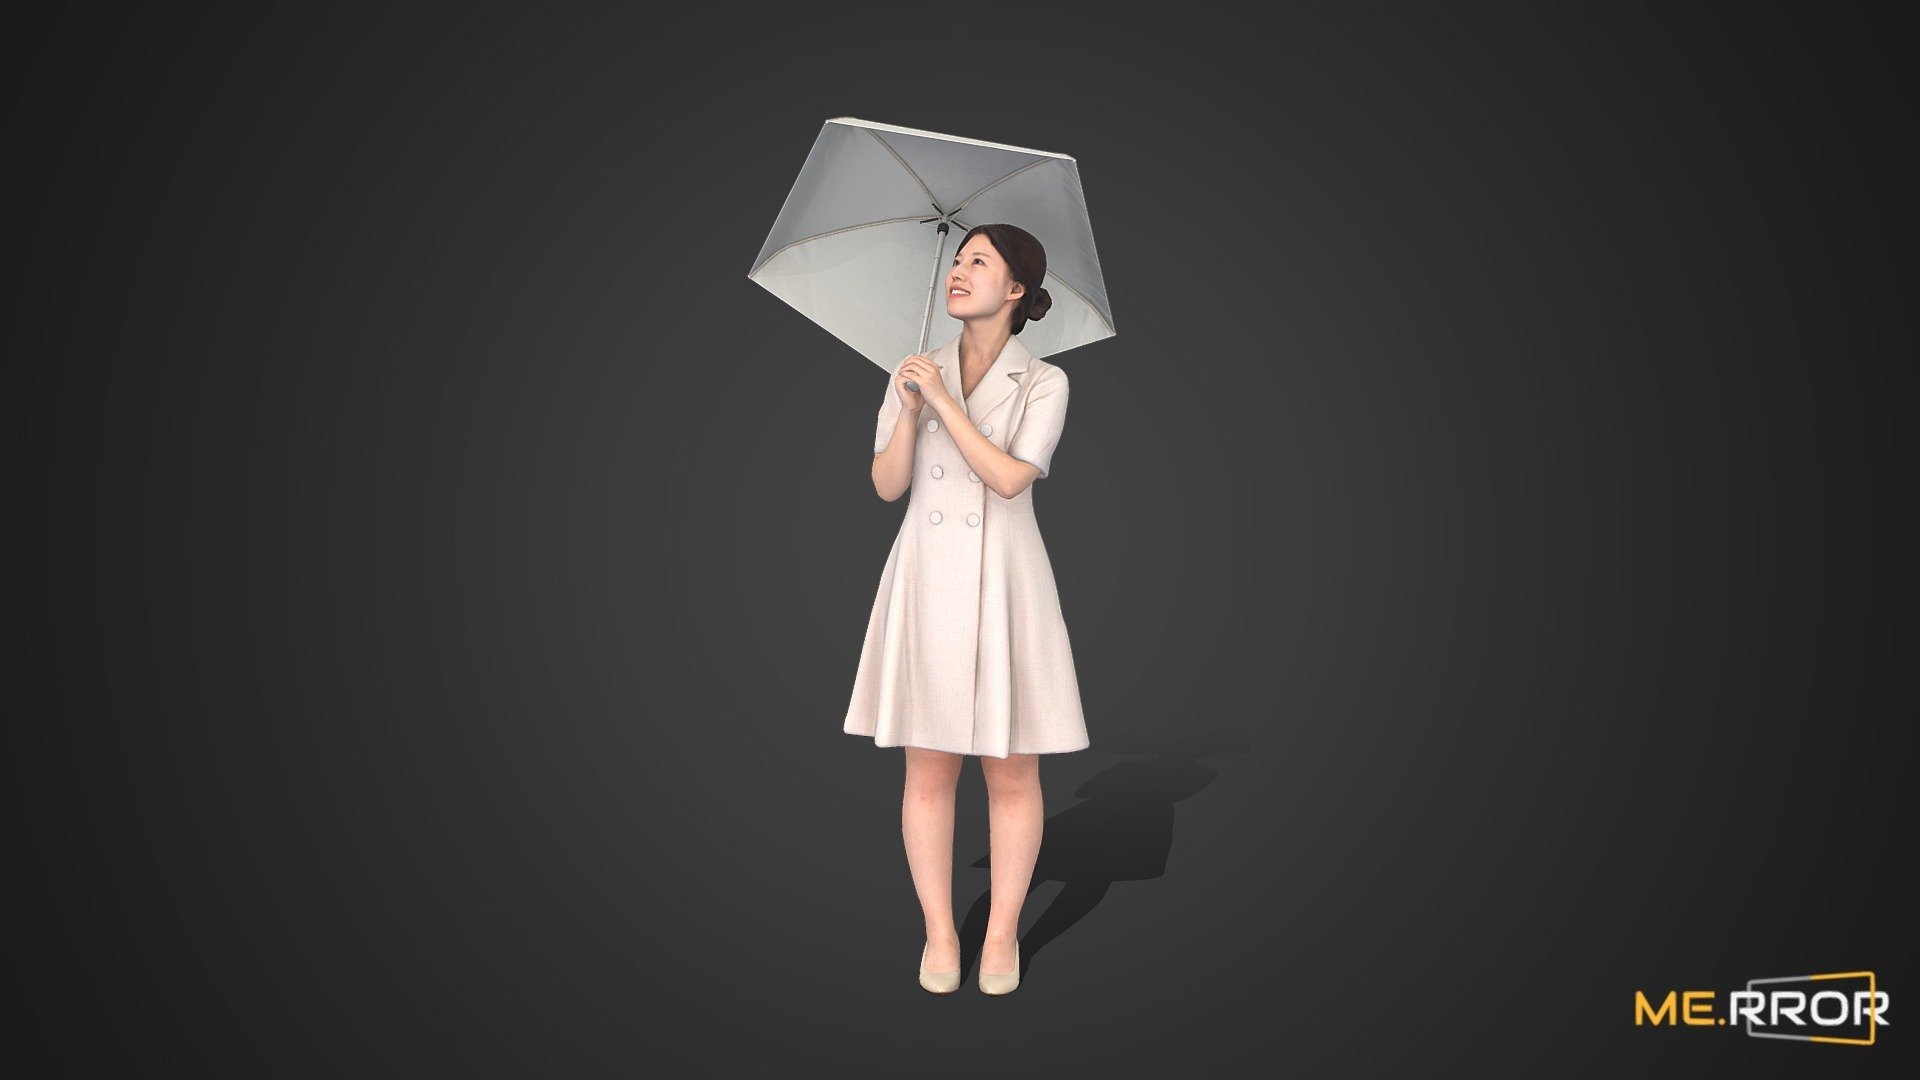 ME.RROR


From 3D models of Asian individuals to a fresh selection of free assets available each month - explore a richer diversity of photorealistic 3D assets at the ME.RROR asset store!

https://me-rror.com/store




[Model Info]




Model Formats : FBX, MAX


Texture Maps (8K) : Diffuse, Normal




Find Scanned - 2M poly version here: https://sketchfab.com/3d-models/92ca0ce74837497caffac3dffafabb0a



If you encounter any problems using this model, please feel free to contact us. We'd be glad to help you.



[About ME.RROR]

Step into the future with ME.RROR, South Korea's leading 3D specialist. Bespoke creations are not just possible; they are our specialty.

Service areas:




3D scanning

3D modeling

Virtual human creation

Inquiries: https://merror.channel.io/lounge - [Game-Ready] Asian Woman Scan_Posed 18 - Buy Royalty Free 3D model by ME.RROR (@merror) 3d model